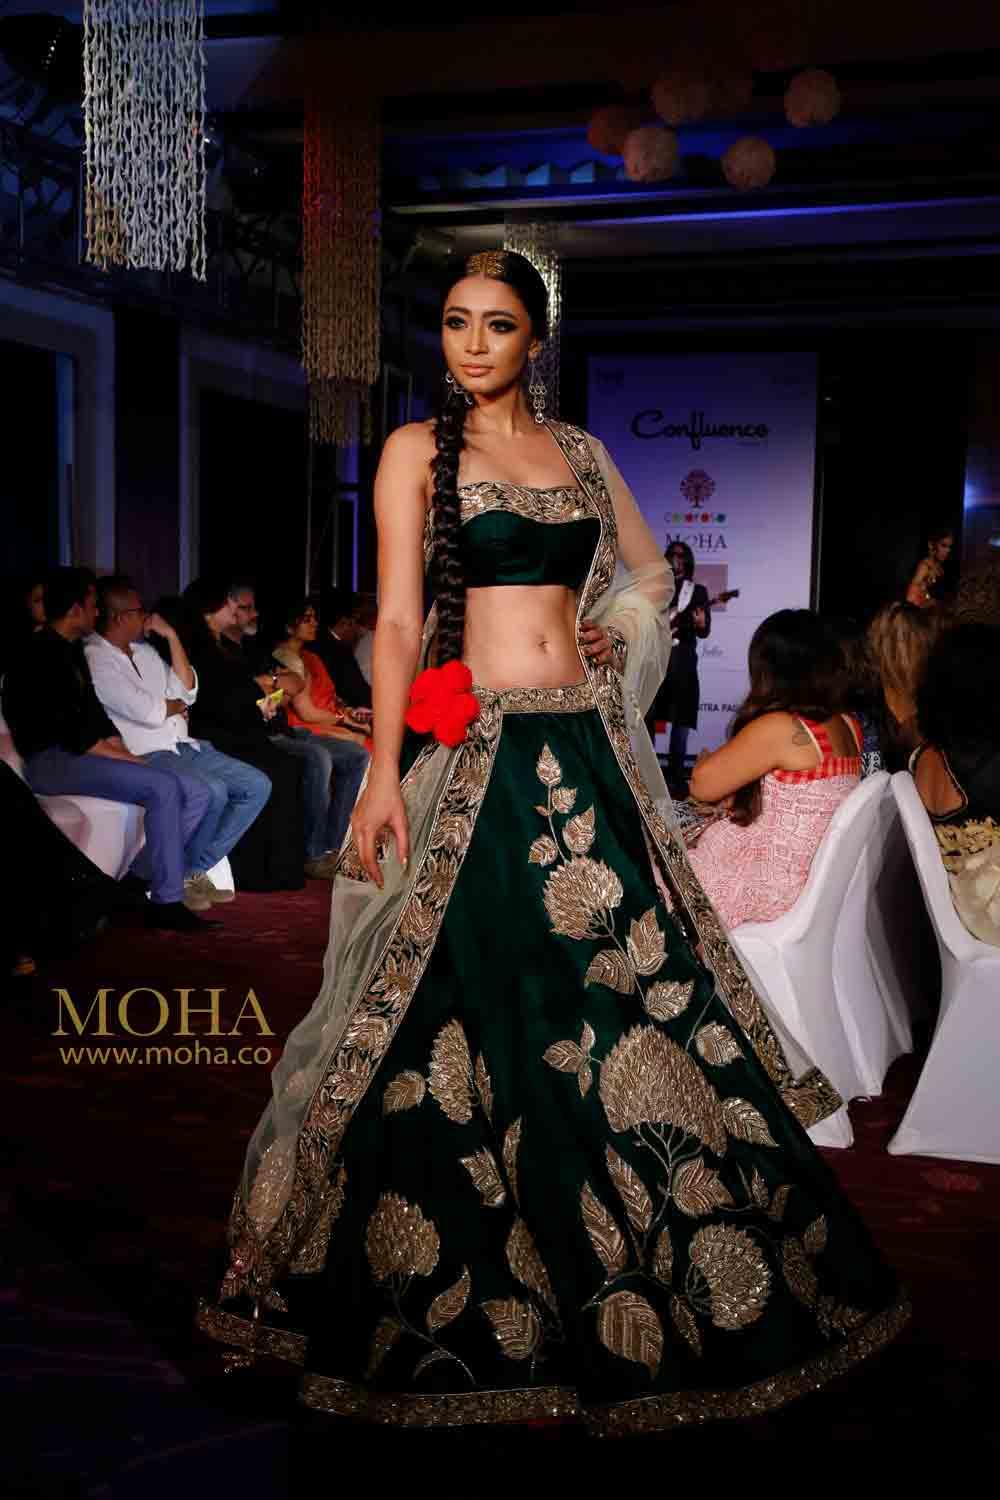 Moha Atelier: A Couture Store For Handcrafted Designer Bridal Wear